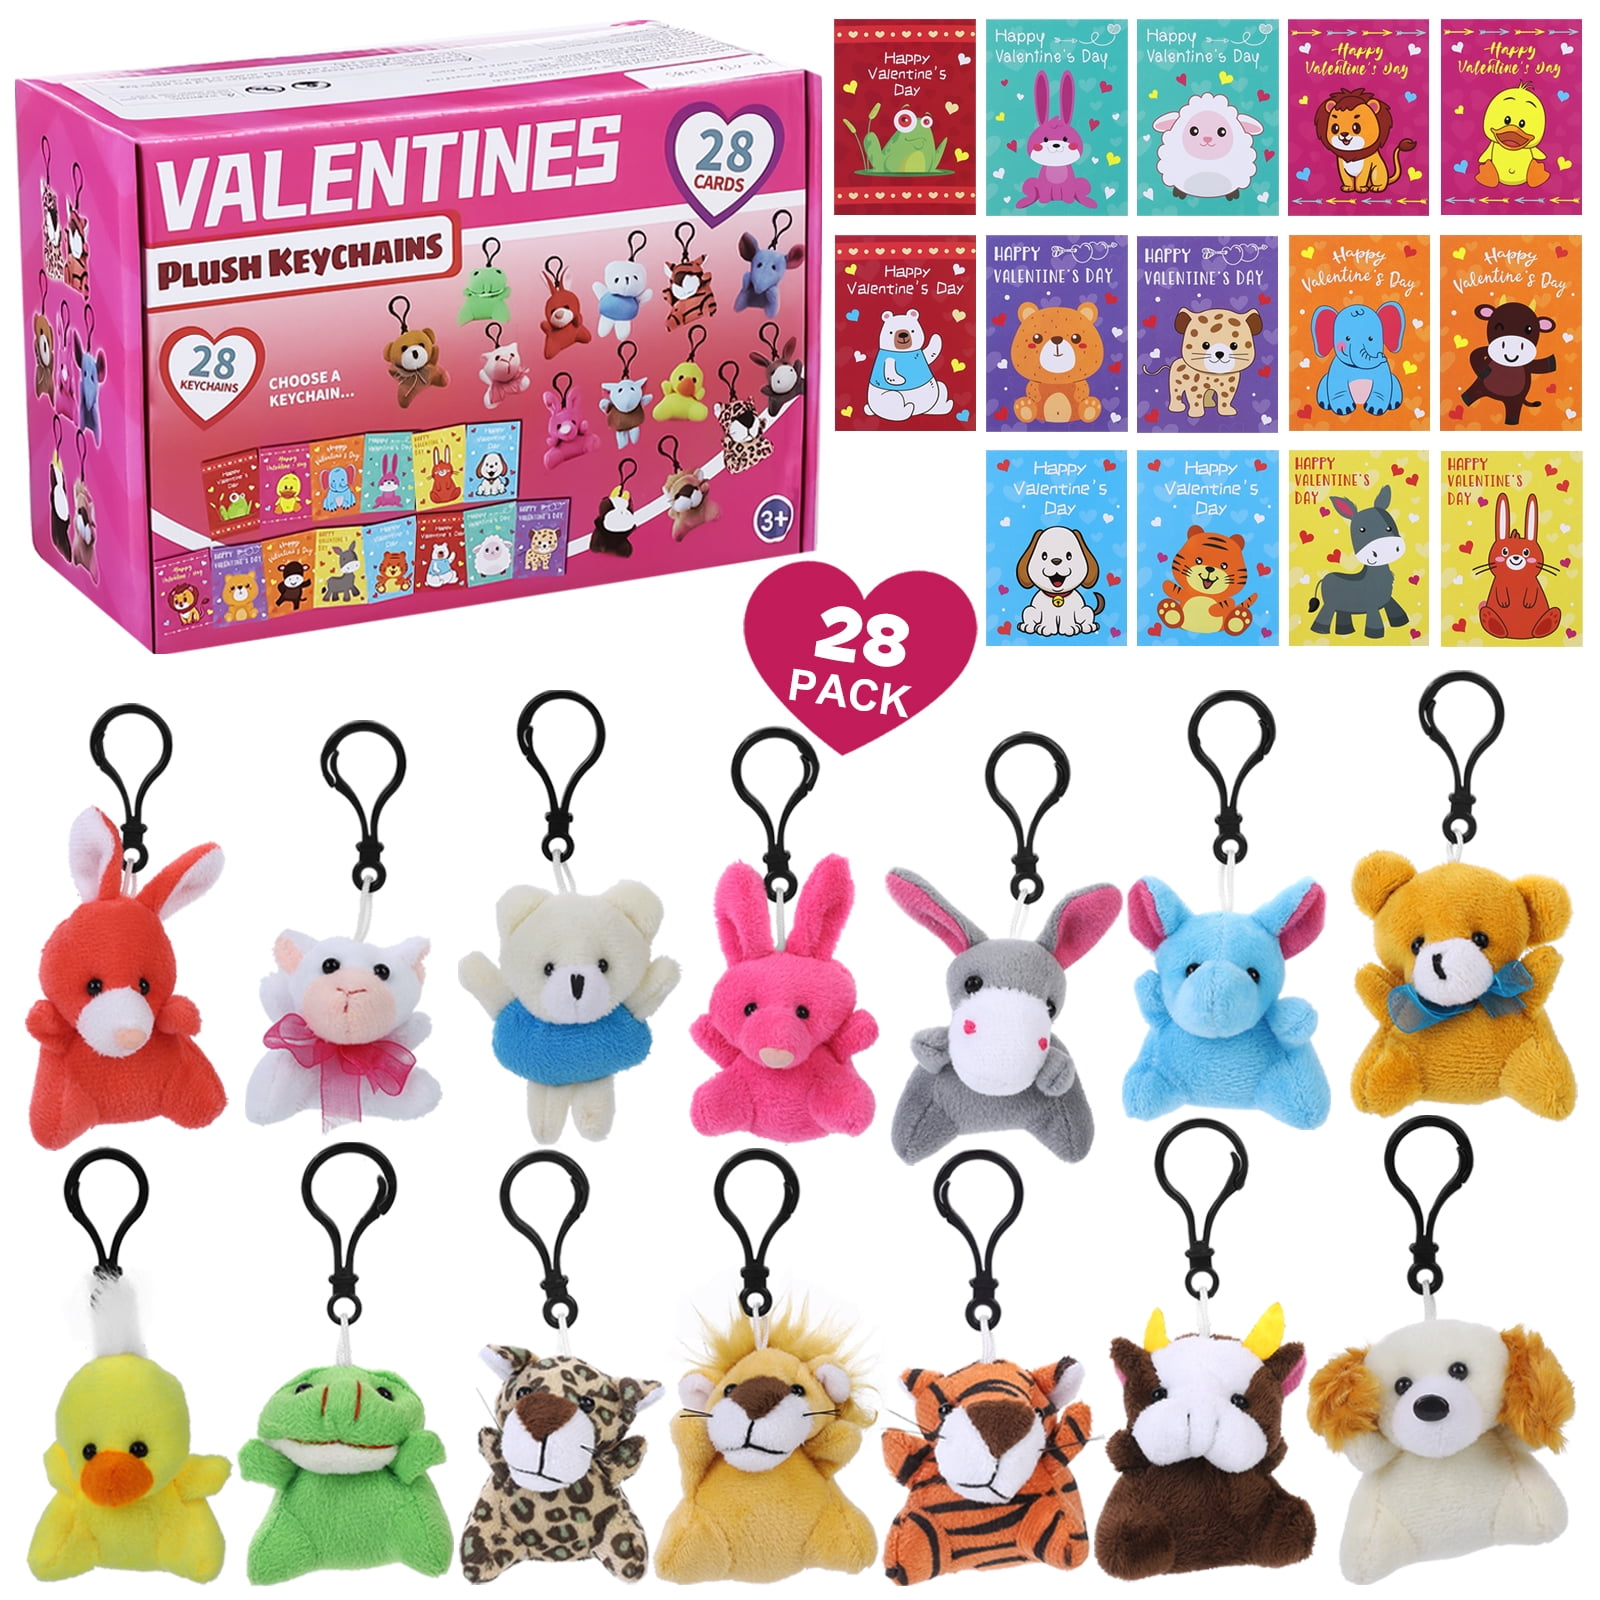 28 Pack Valentines Day Gifts Cards for Kids with Animal Plush Toy